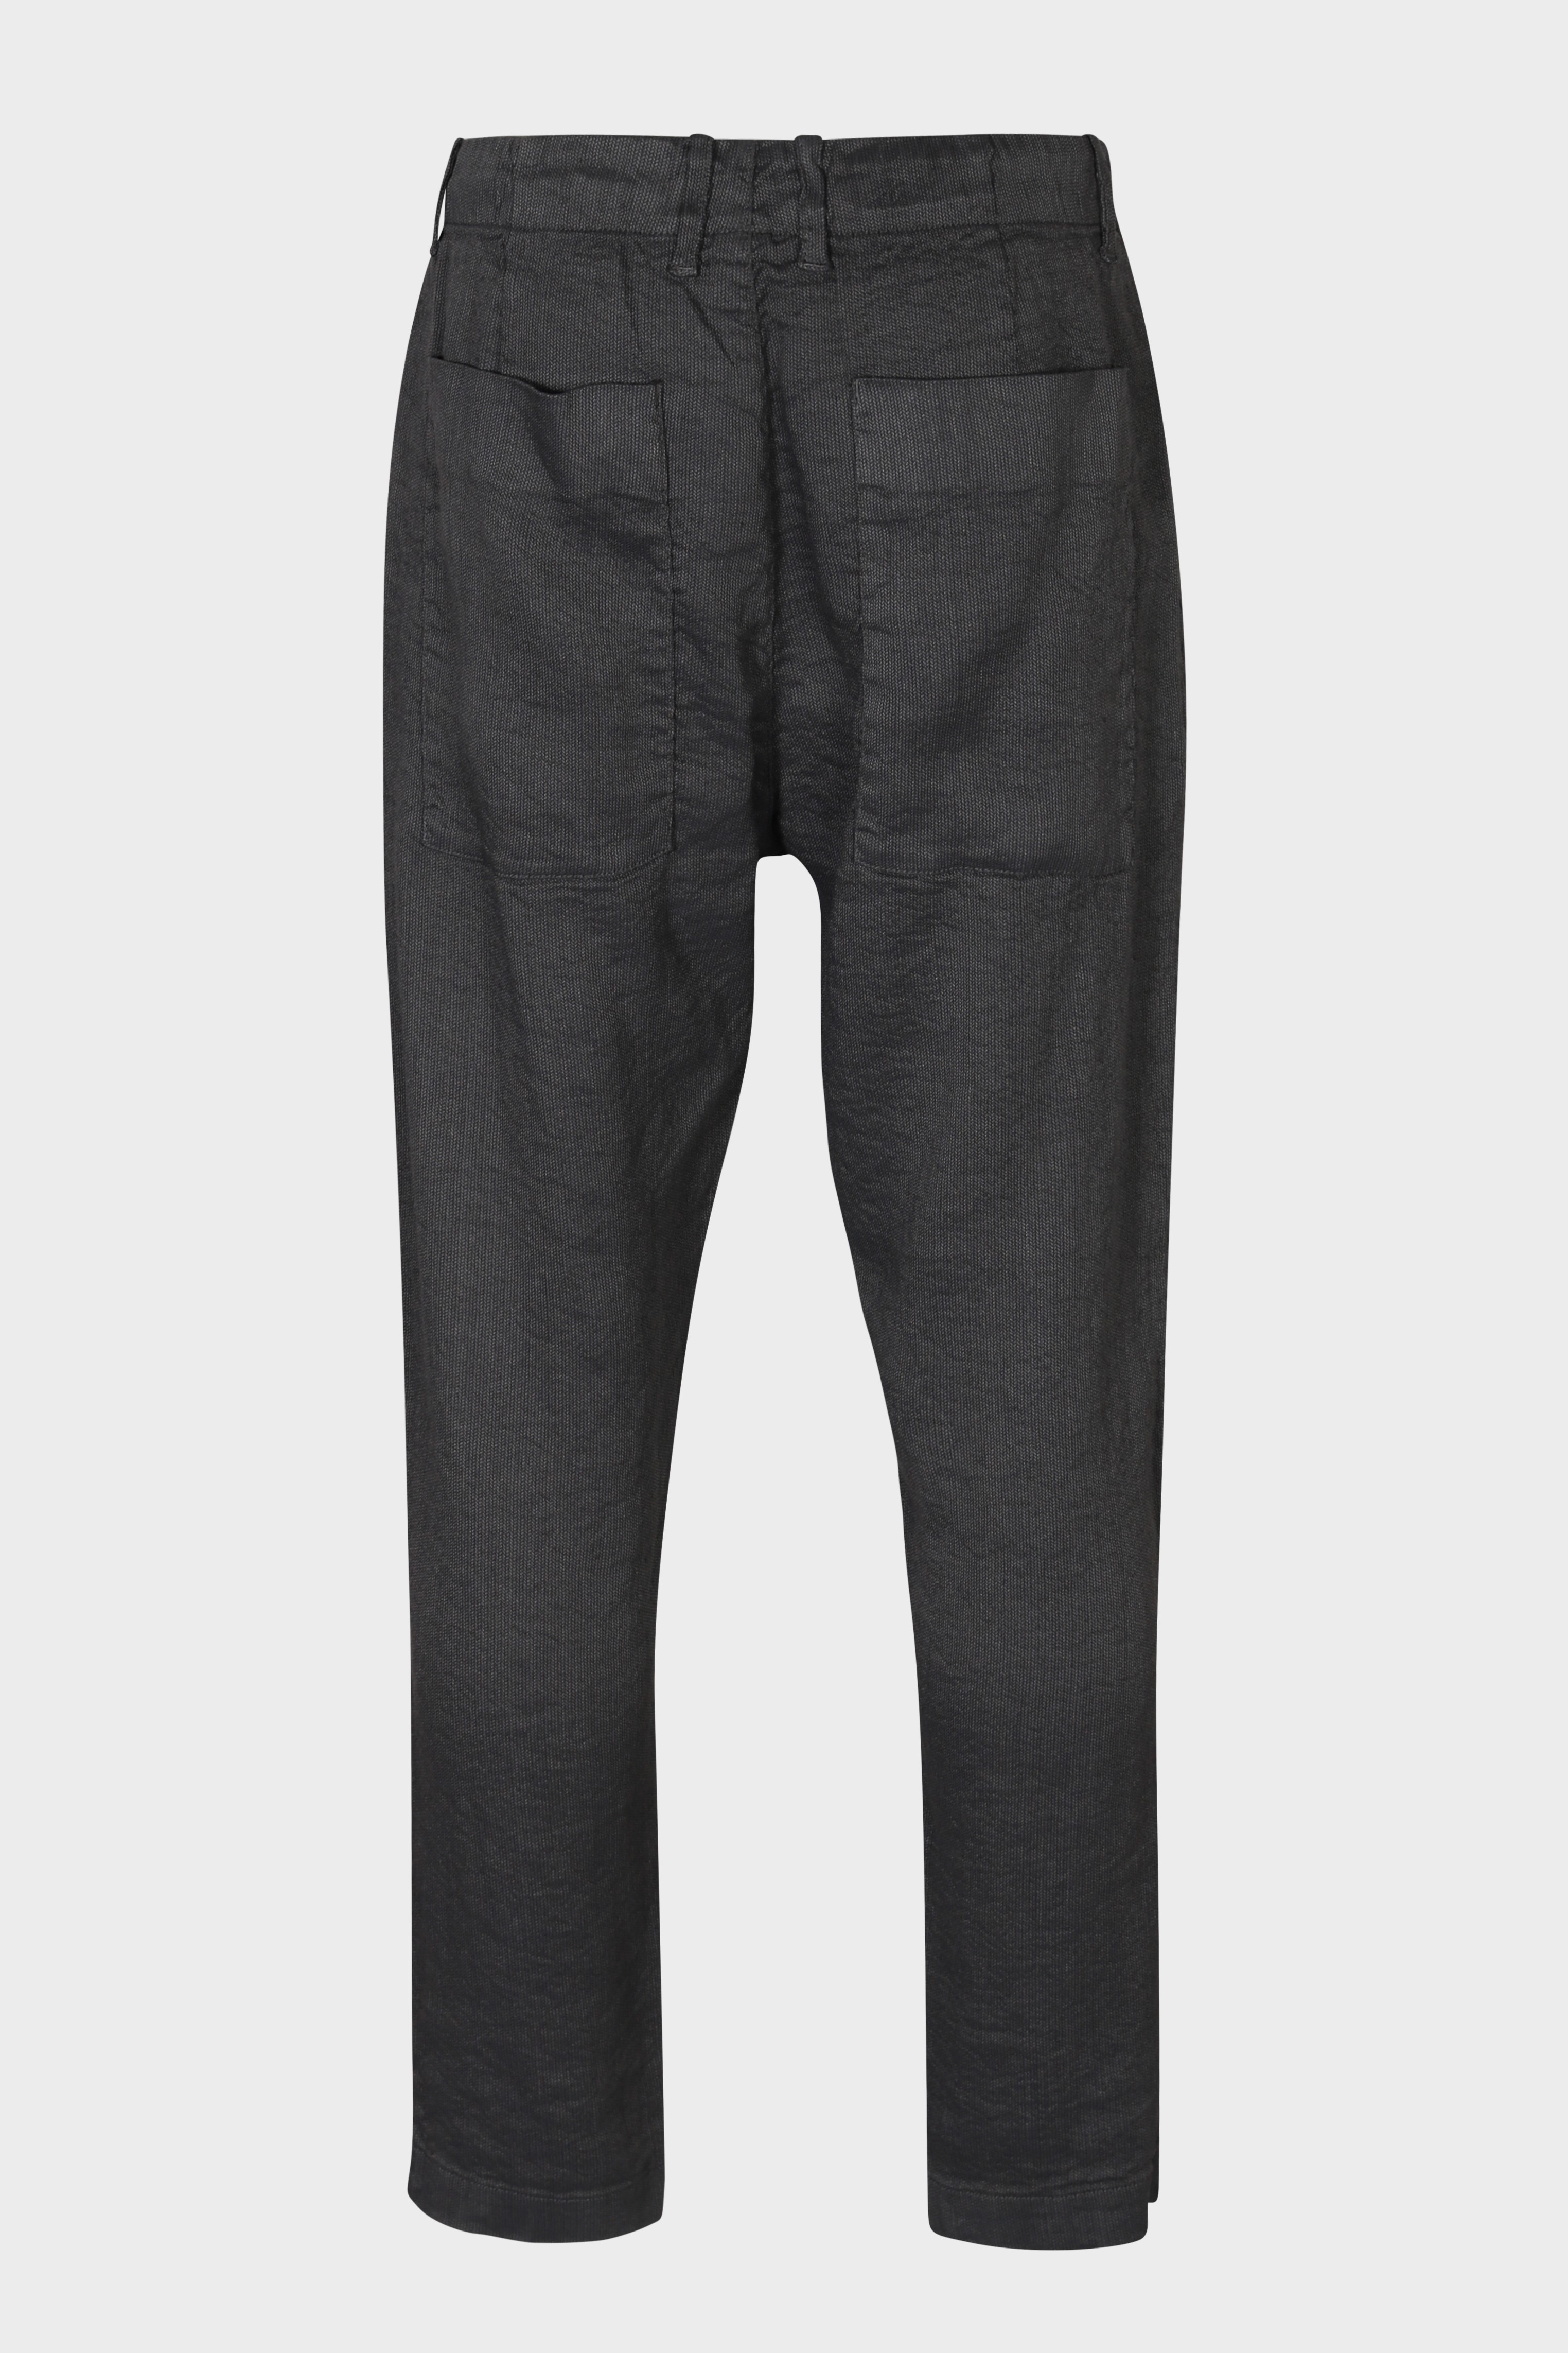 TRANSIT UOMO Structure Stretch Pant in Charcoal M